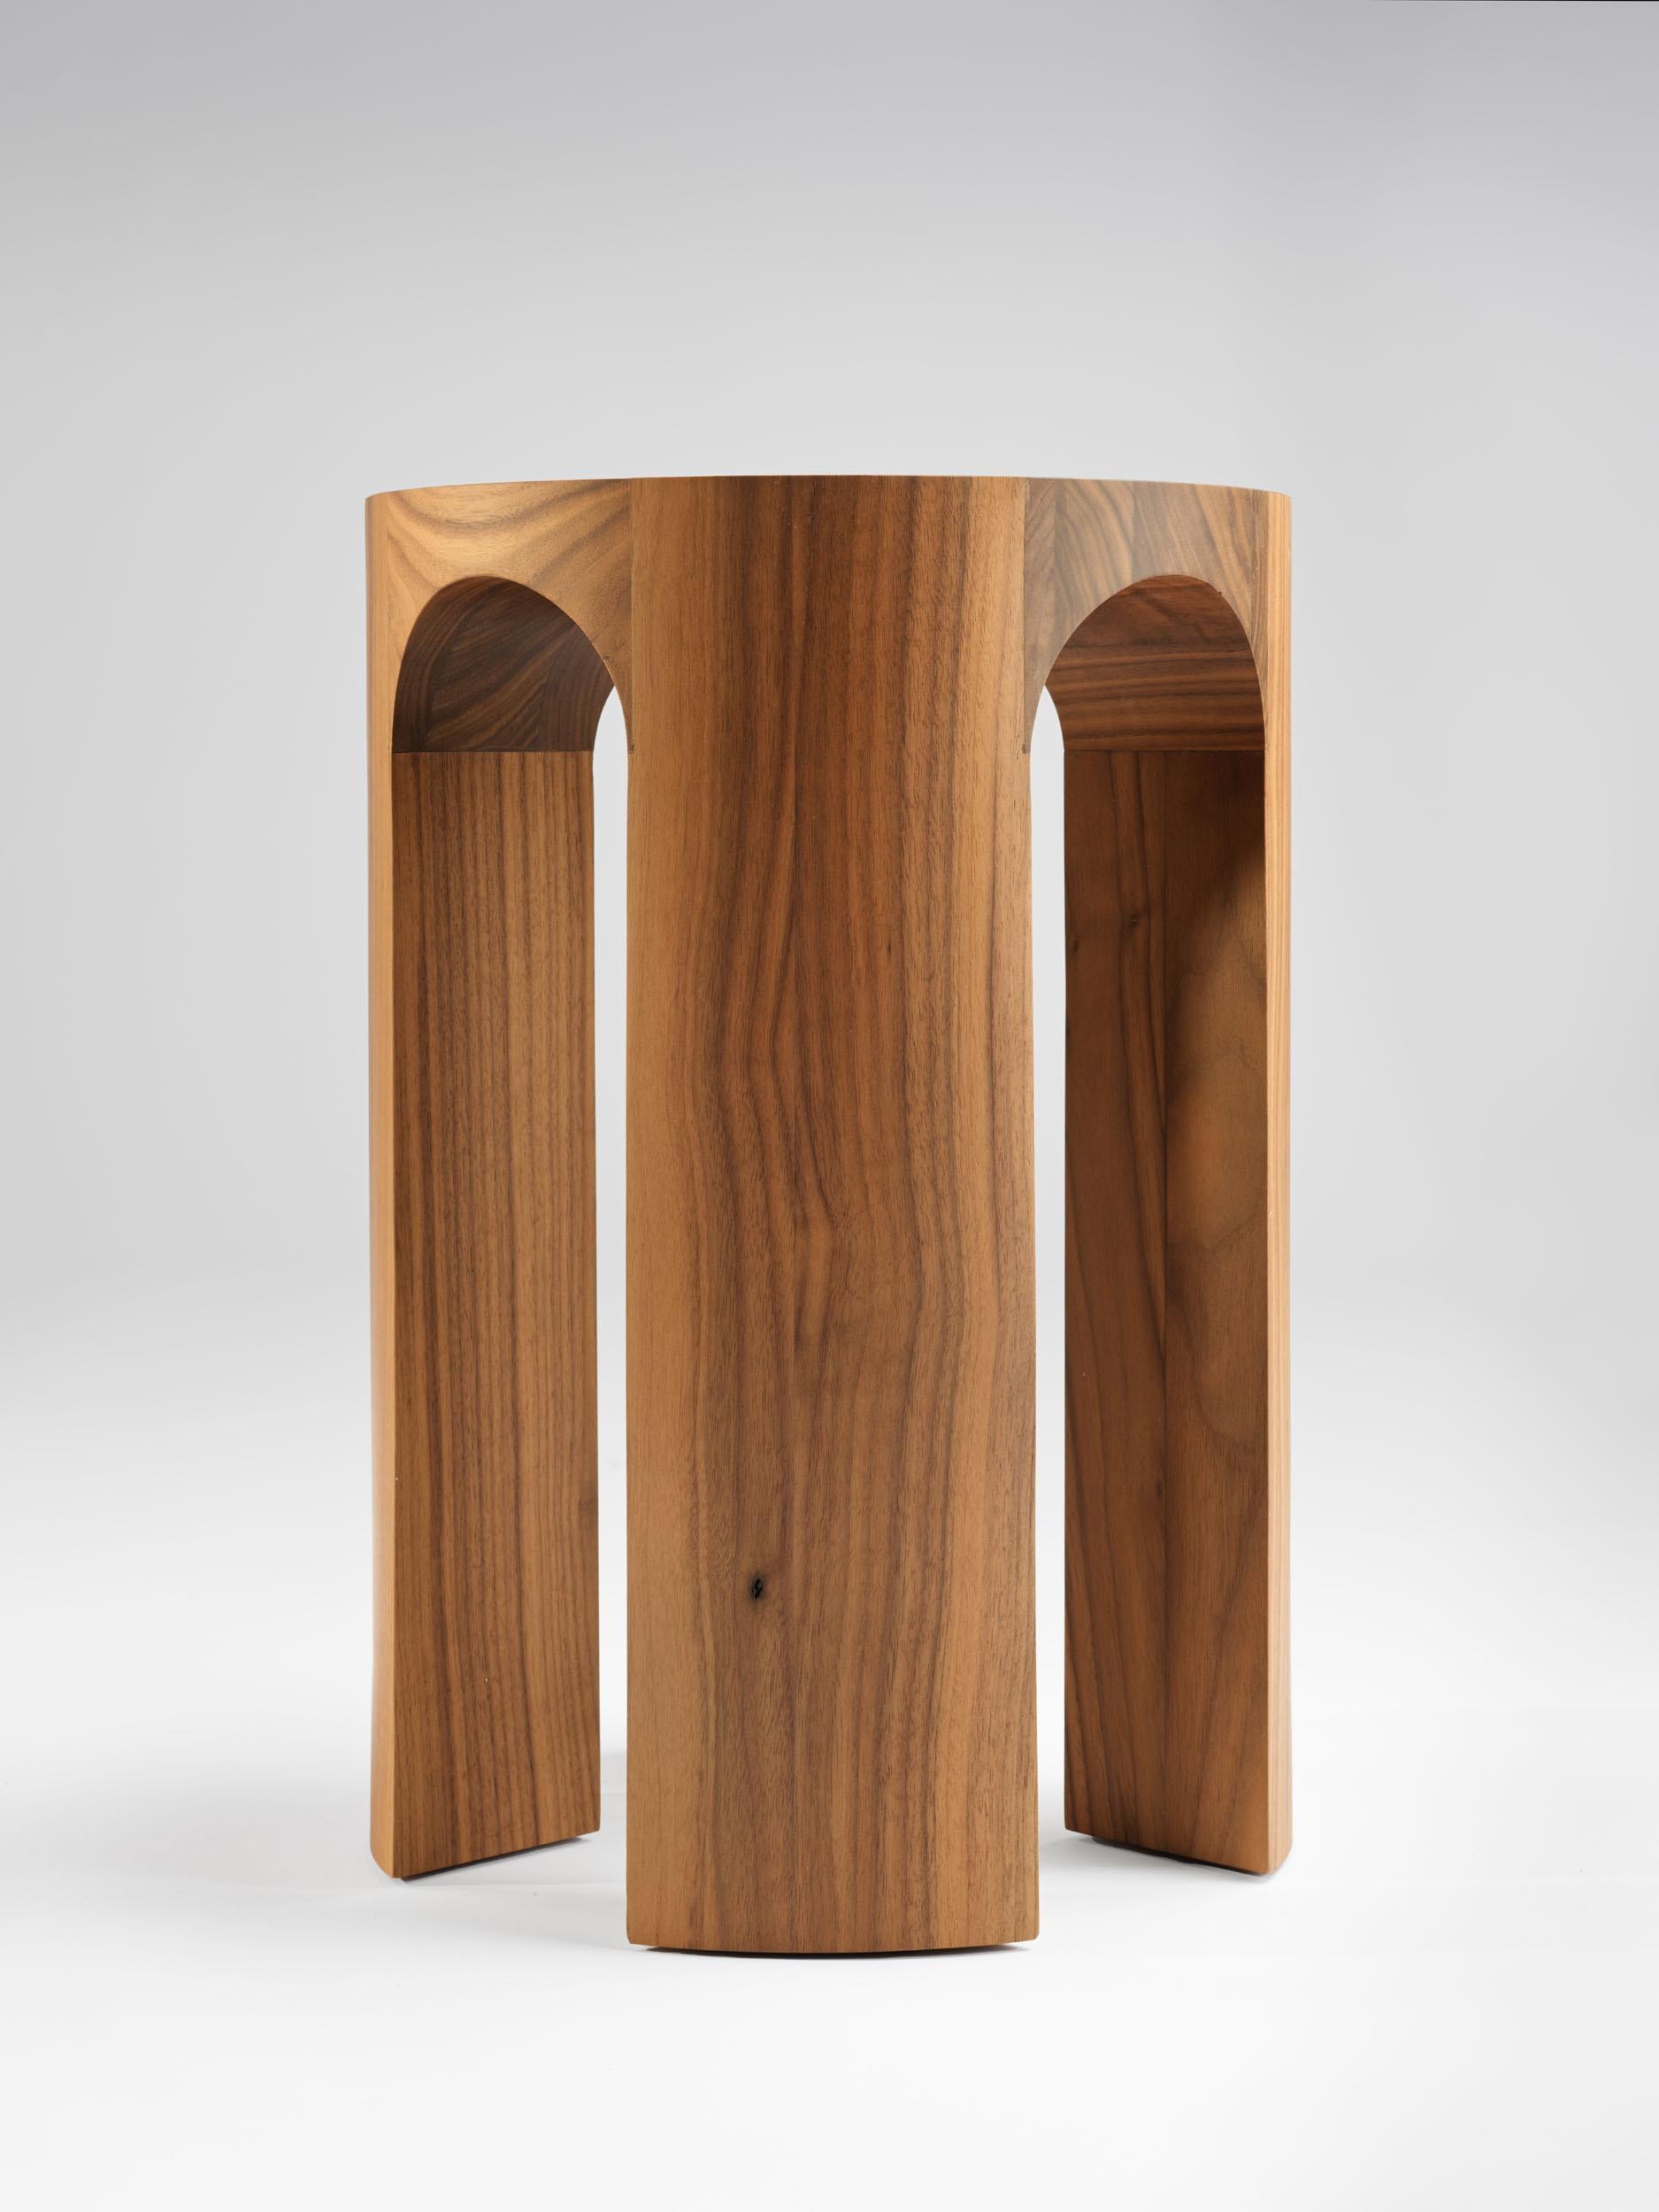 Contemporary Solid American Walnut Arcus Stool by Tim Vranken For Sale 5